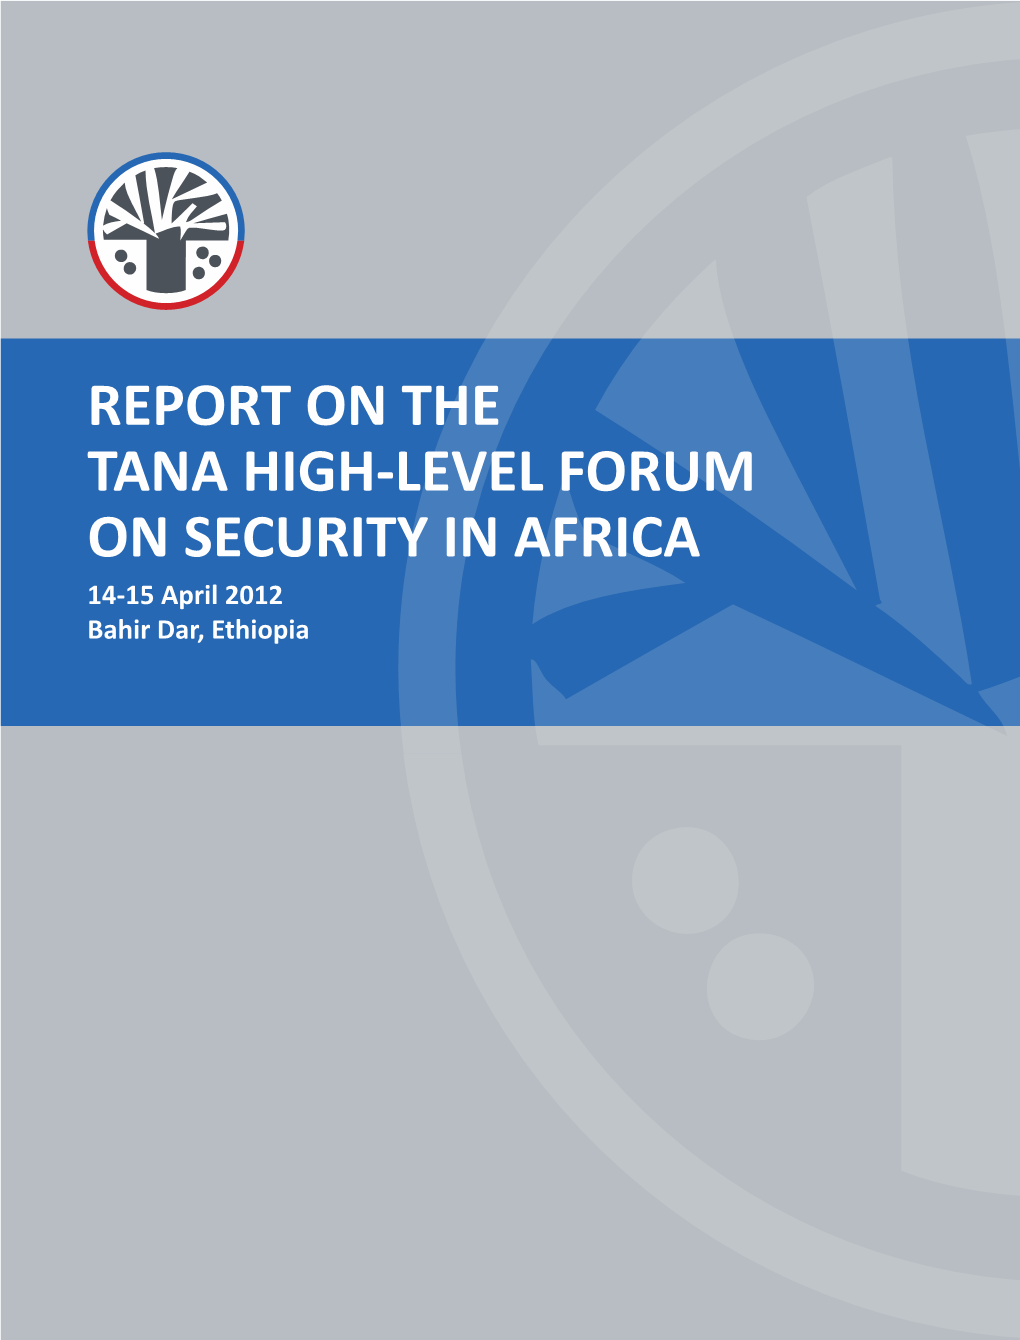 Report on the Tana High-Level Forum on Security in Africa